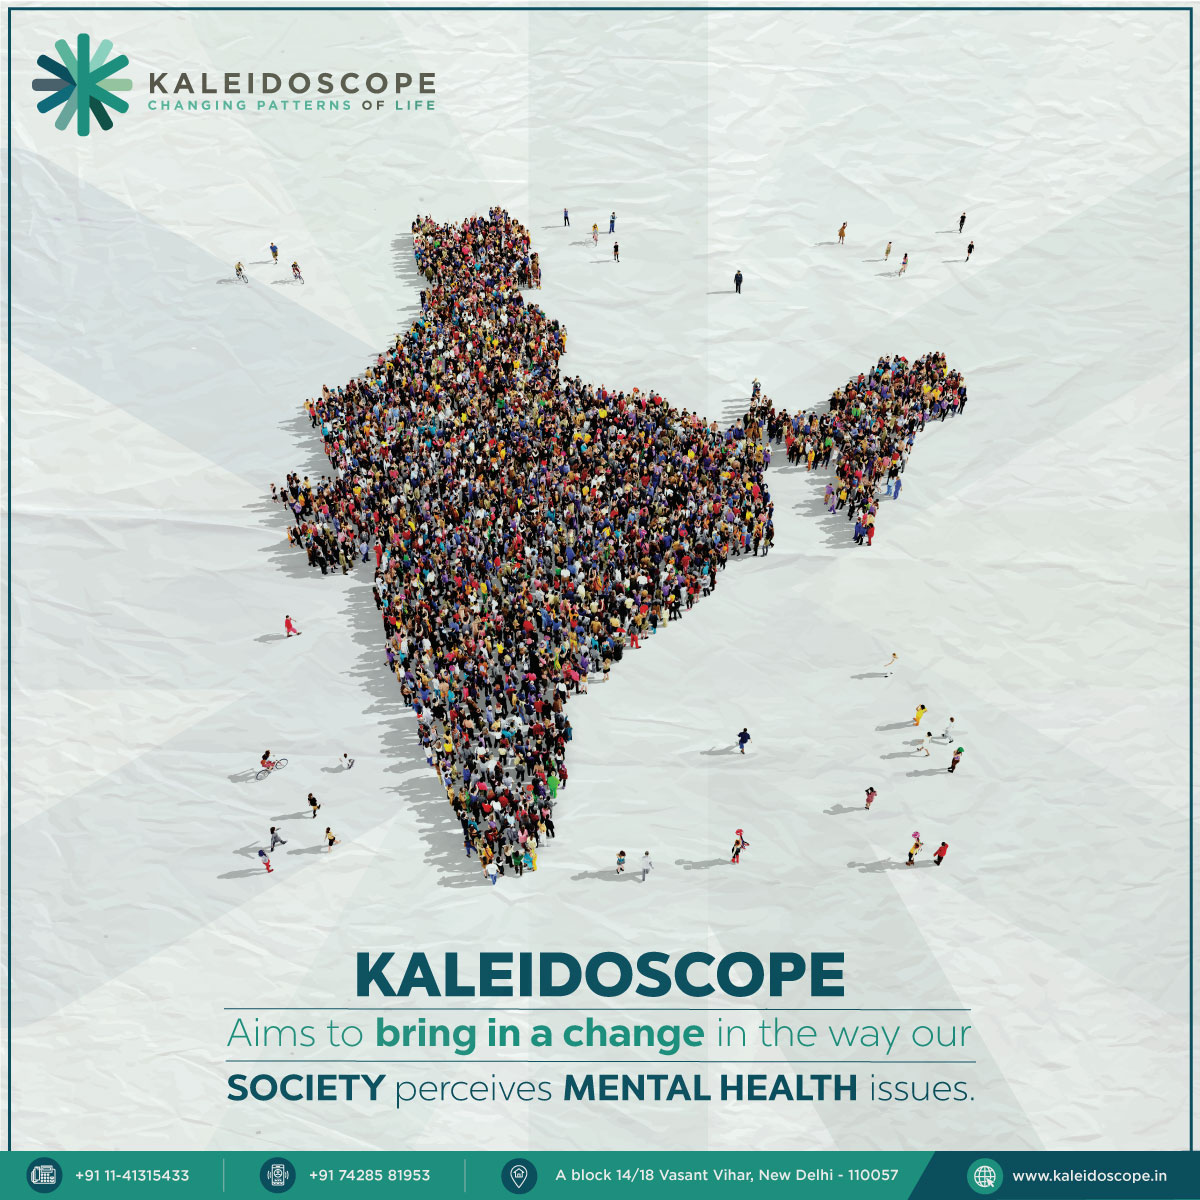 Our society is in dire need of an awakening, for mental well being and mental health.

#kaleidoscope #changingpatternsoflife #changingpatterns #mentalwellbeing #mentalhealthawareness #counseling #mentalhealthsupport #counselling #therapy #mentalhealth #selfcare #counsellor